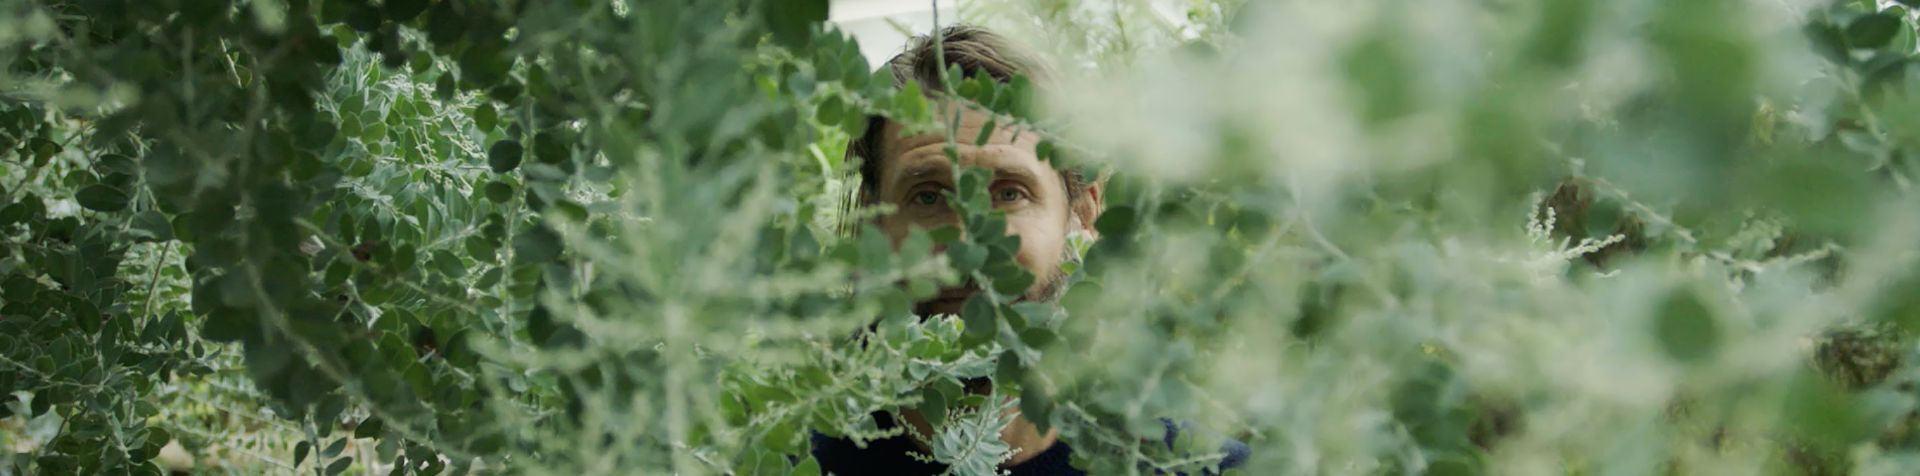 David de Rothschild standing behind some green foliage. He has long brown hair and a beard and is looking straight into the camera